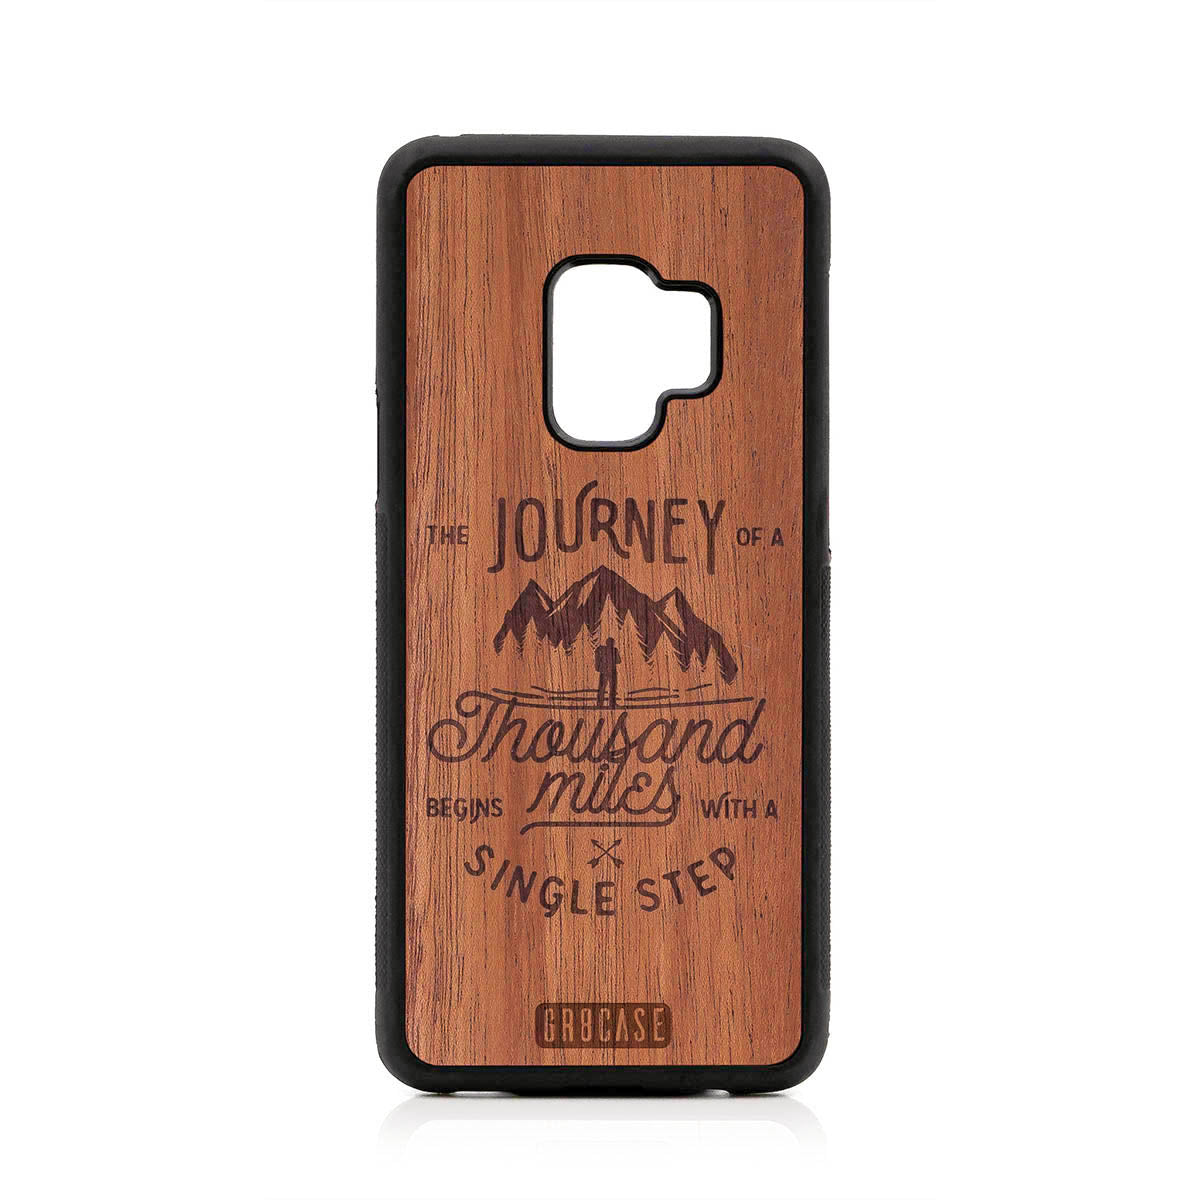 The Journey Of A Thousand Miles Begins With A Single Step Design Wood Case For Samsung Galaxy S9